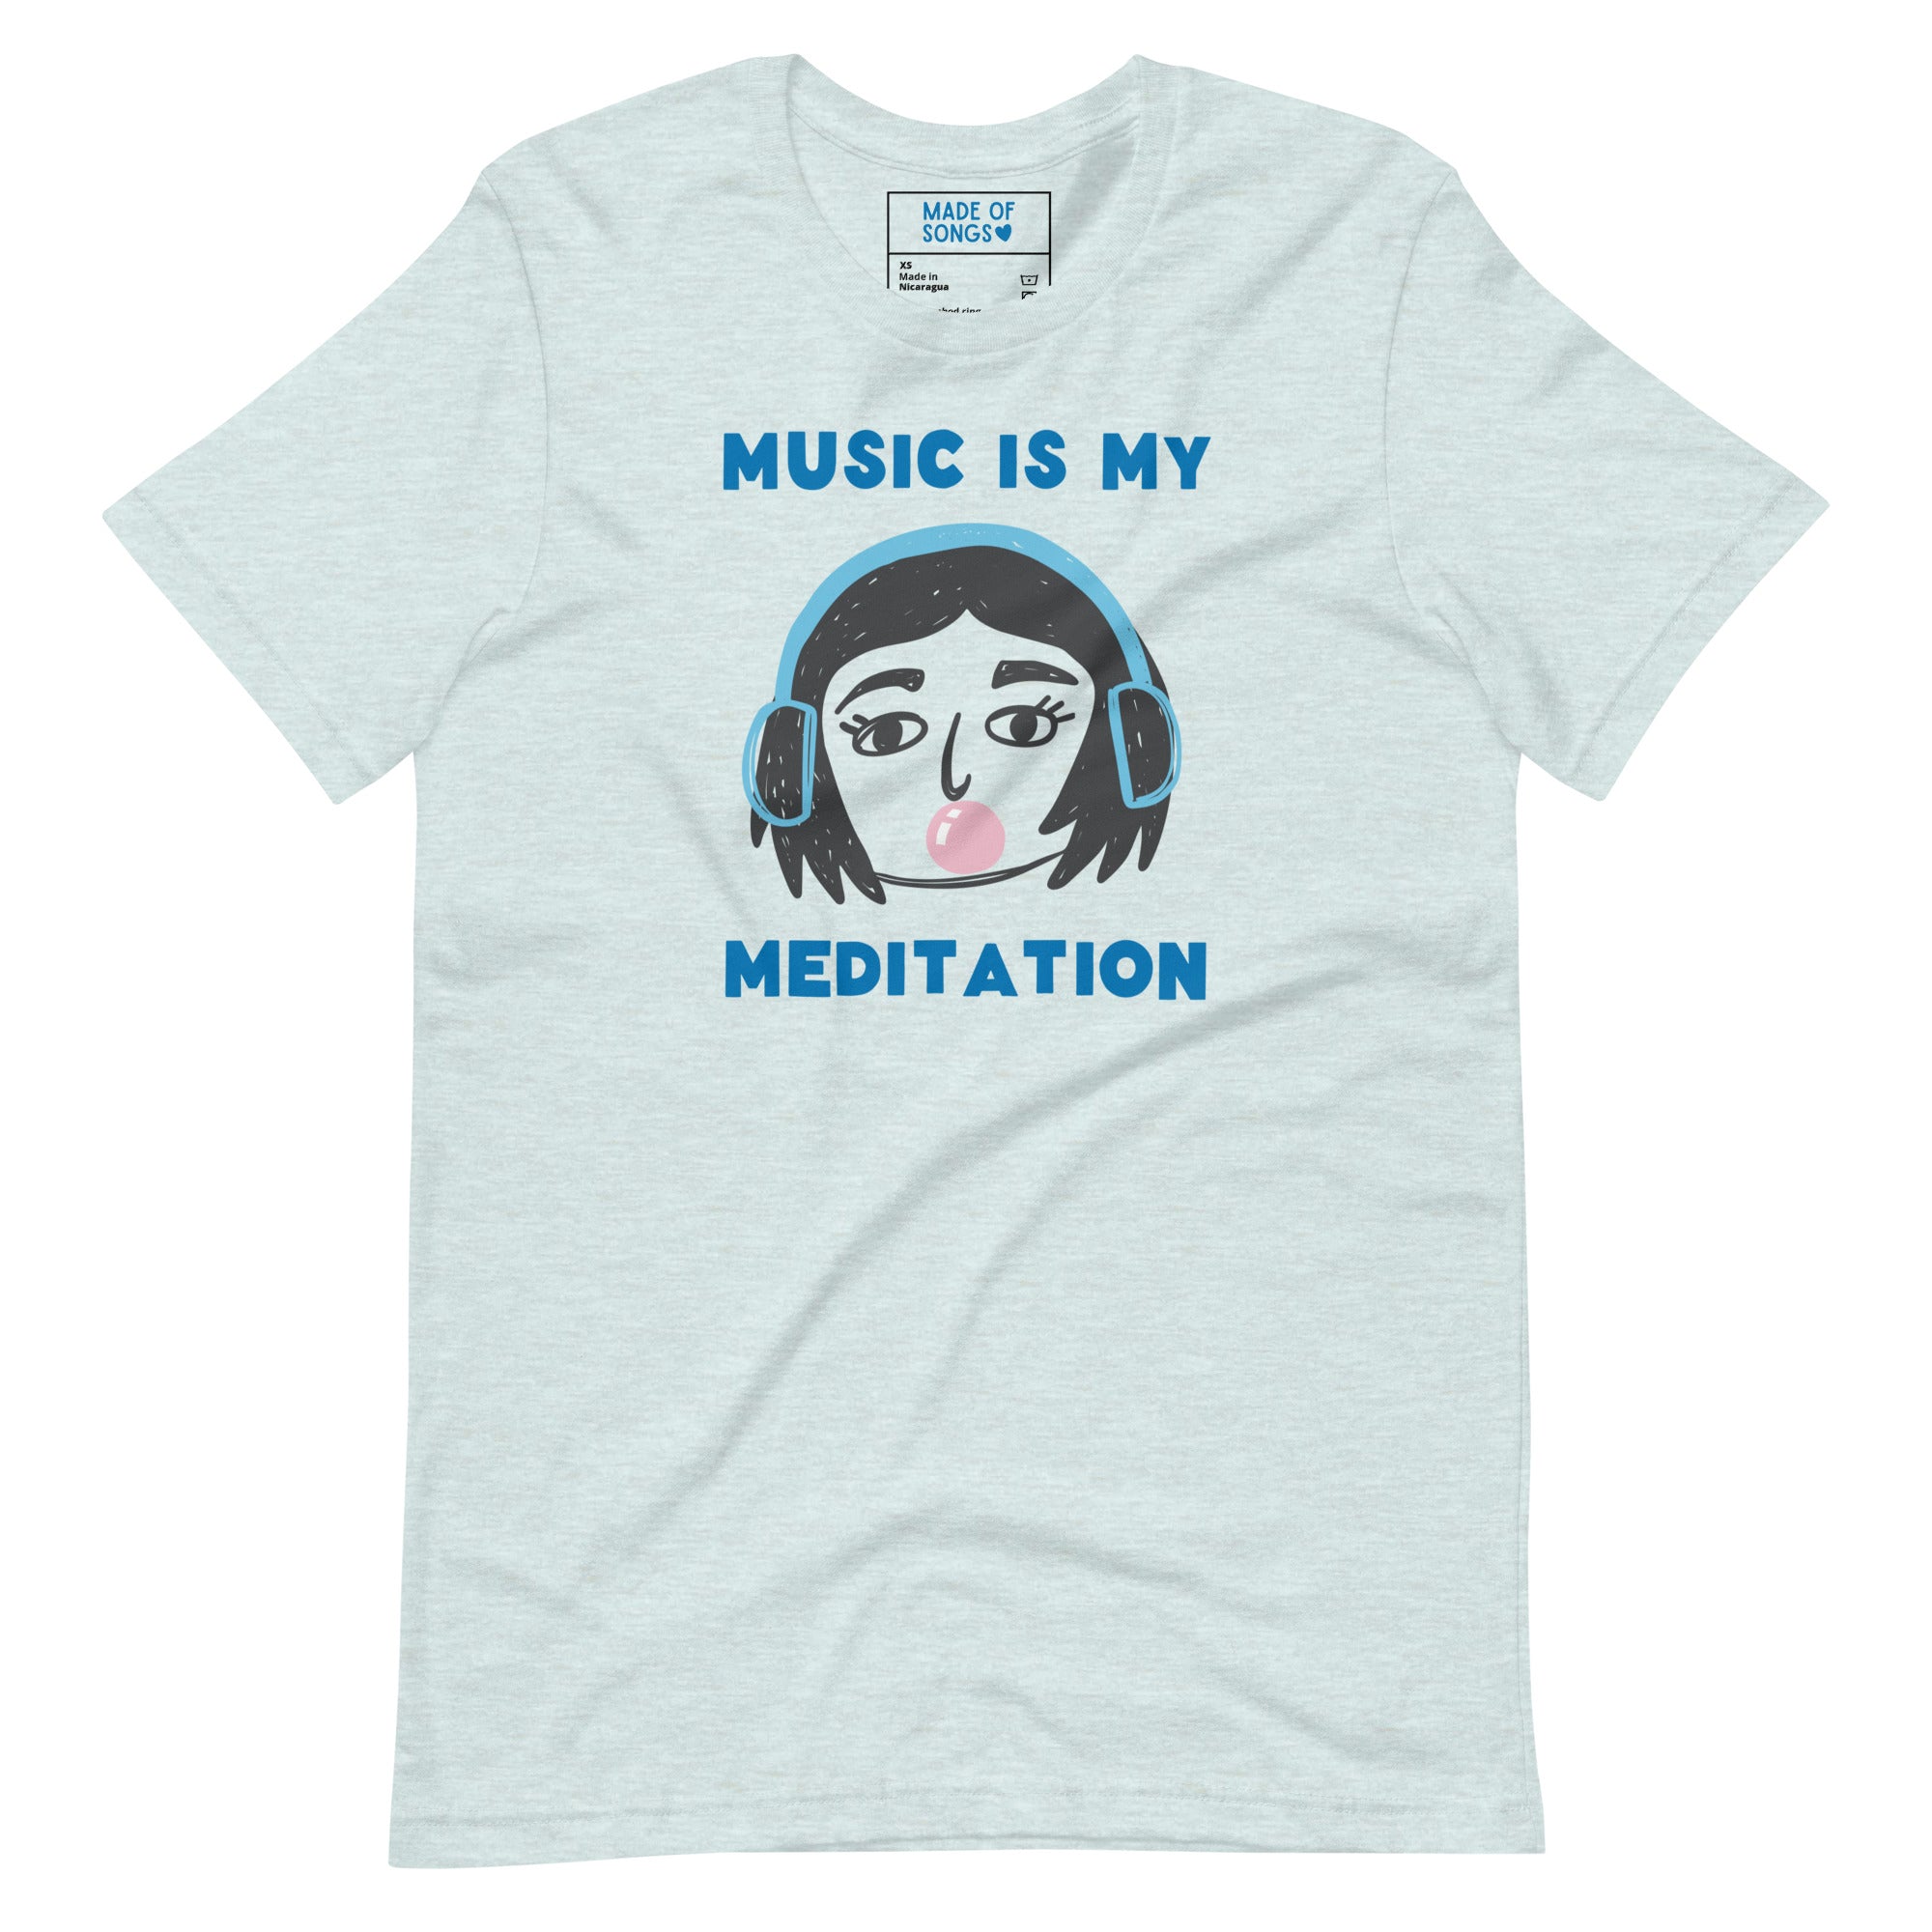 Music Is My Meditation - T-Shirt – Made of Songs